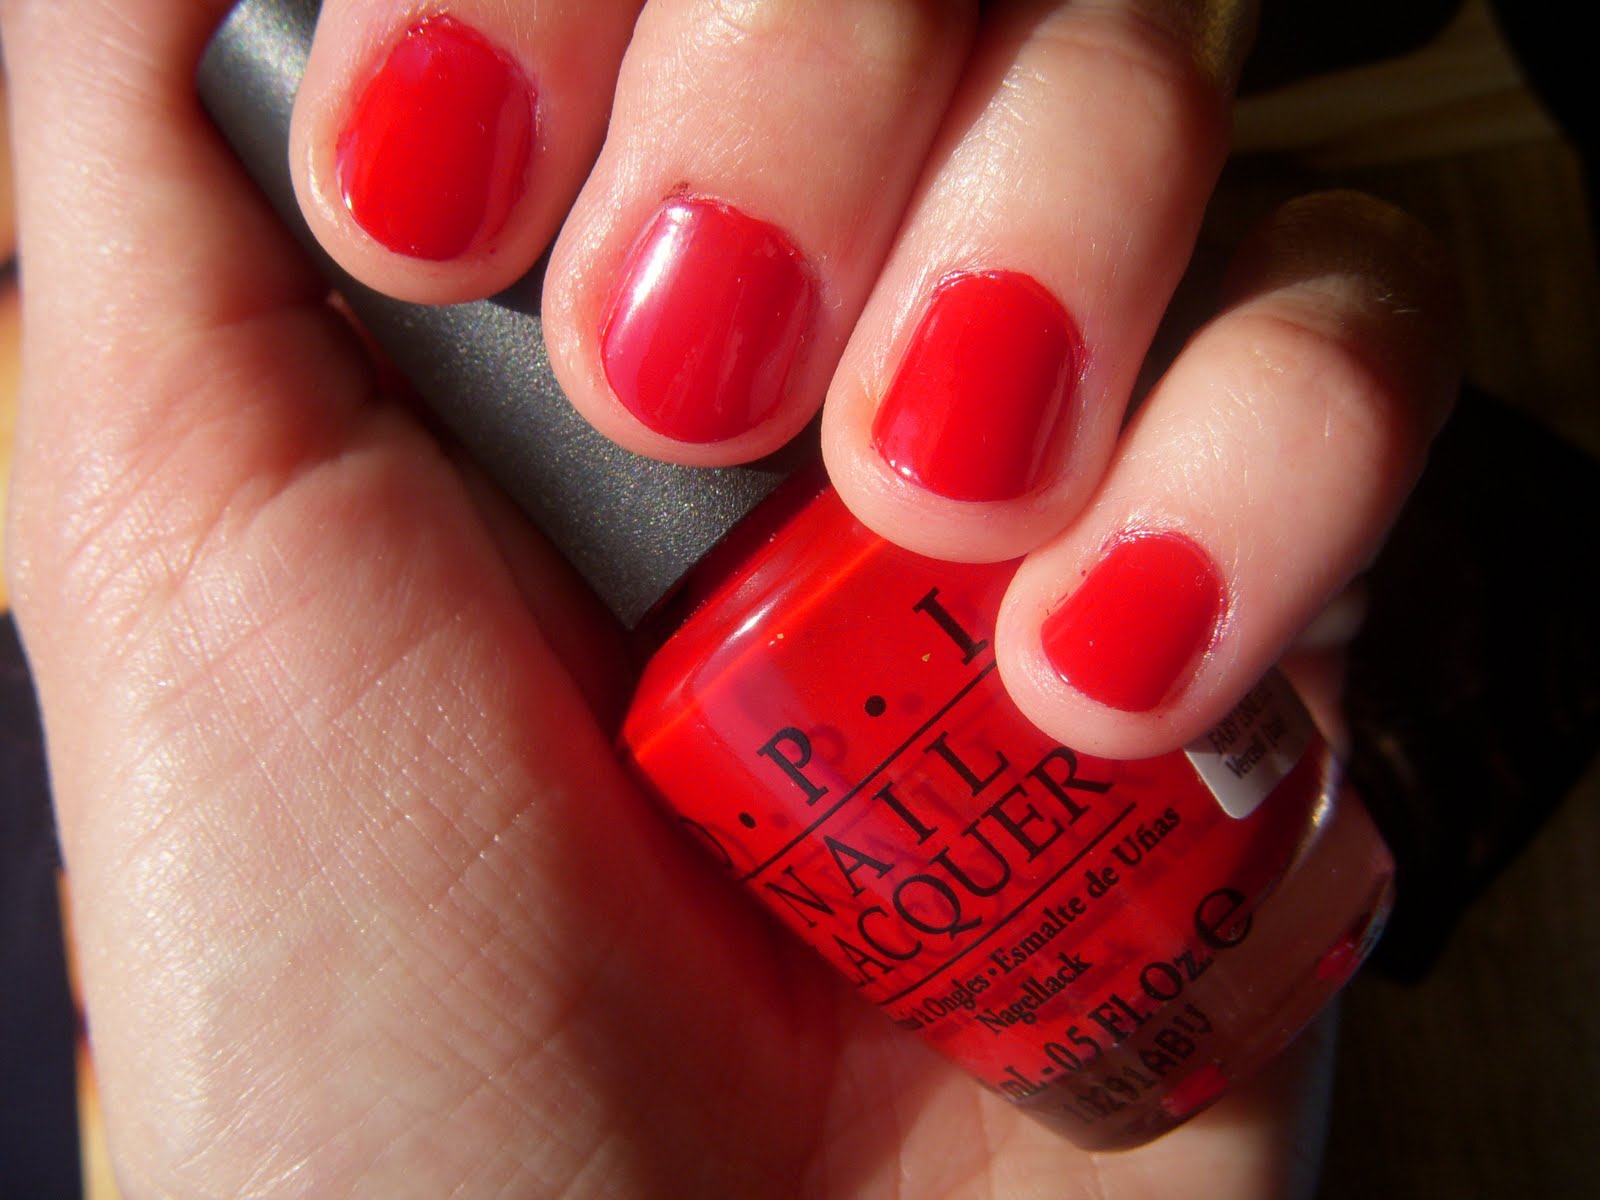 9. OPI "Big Apple Red" from the New York City Collection - wide 2